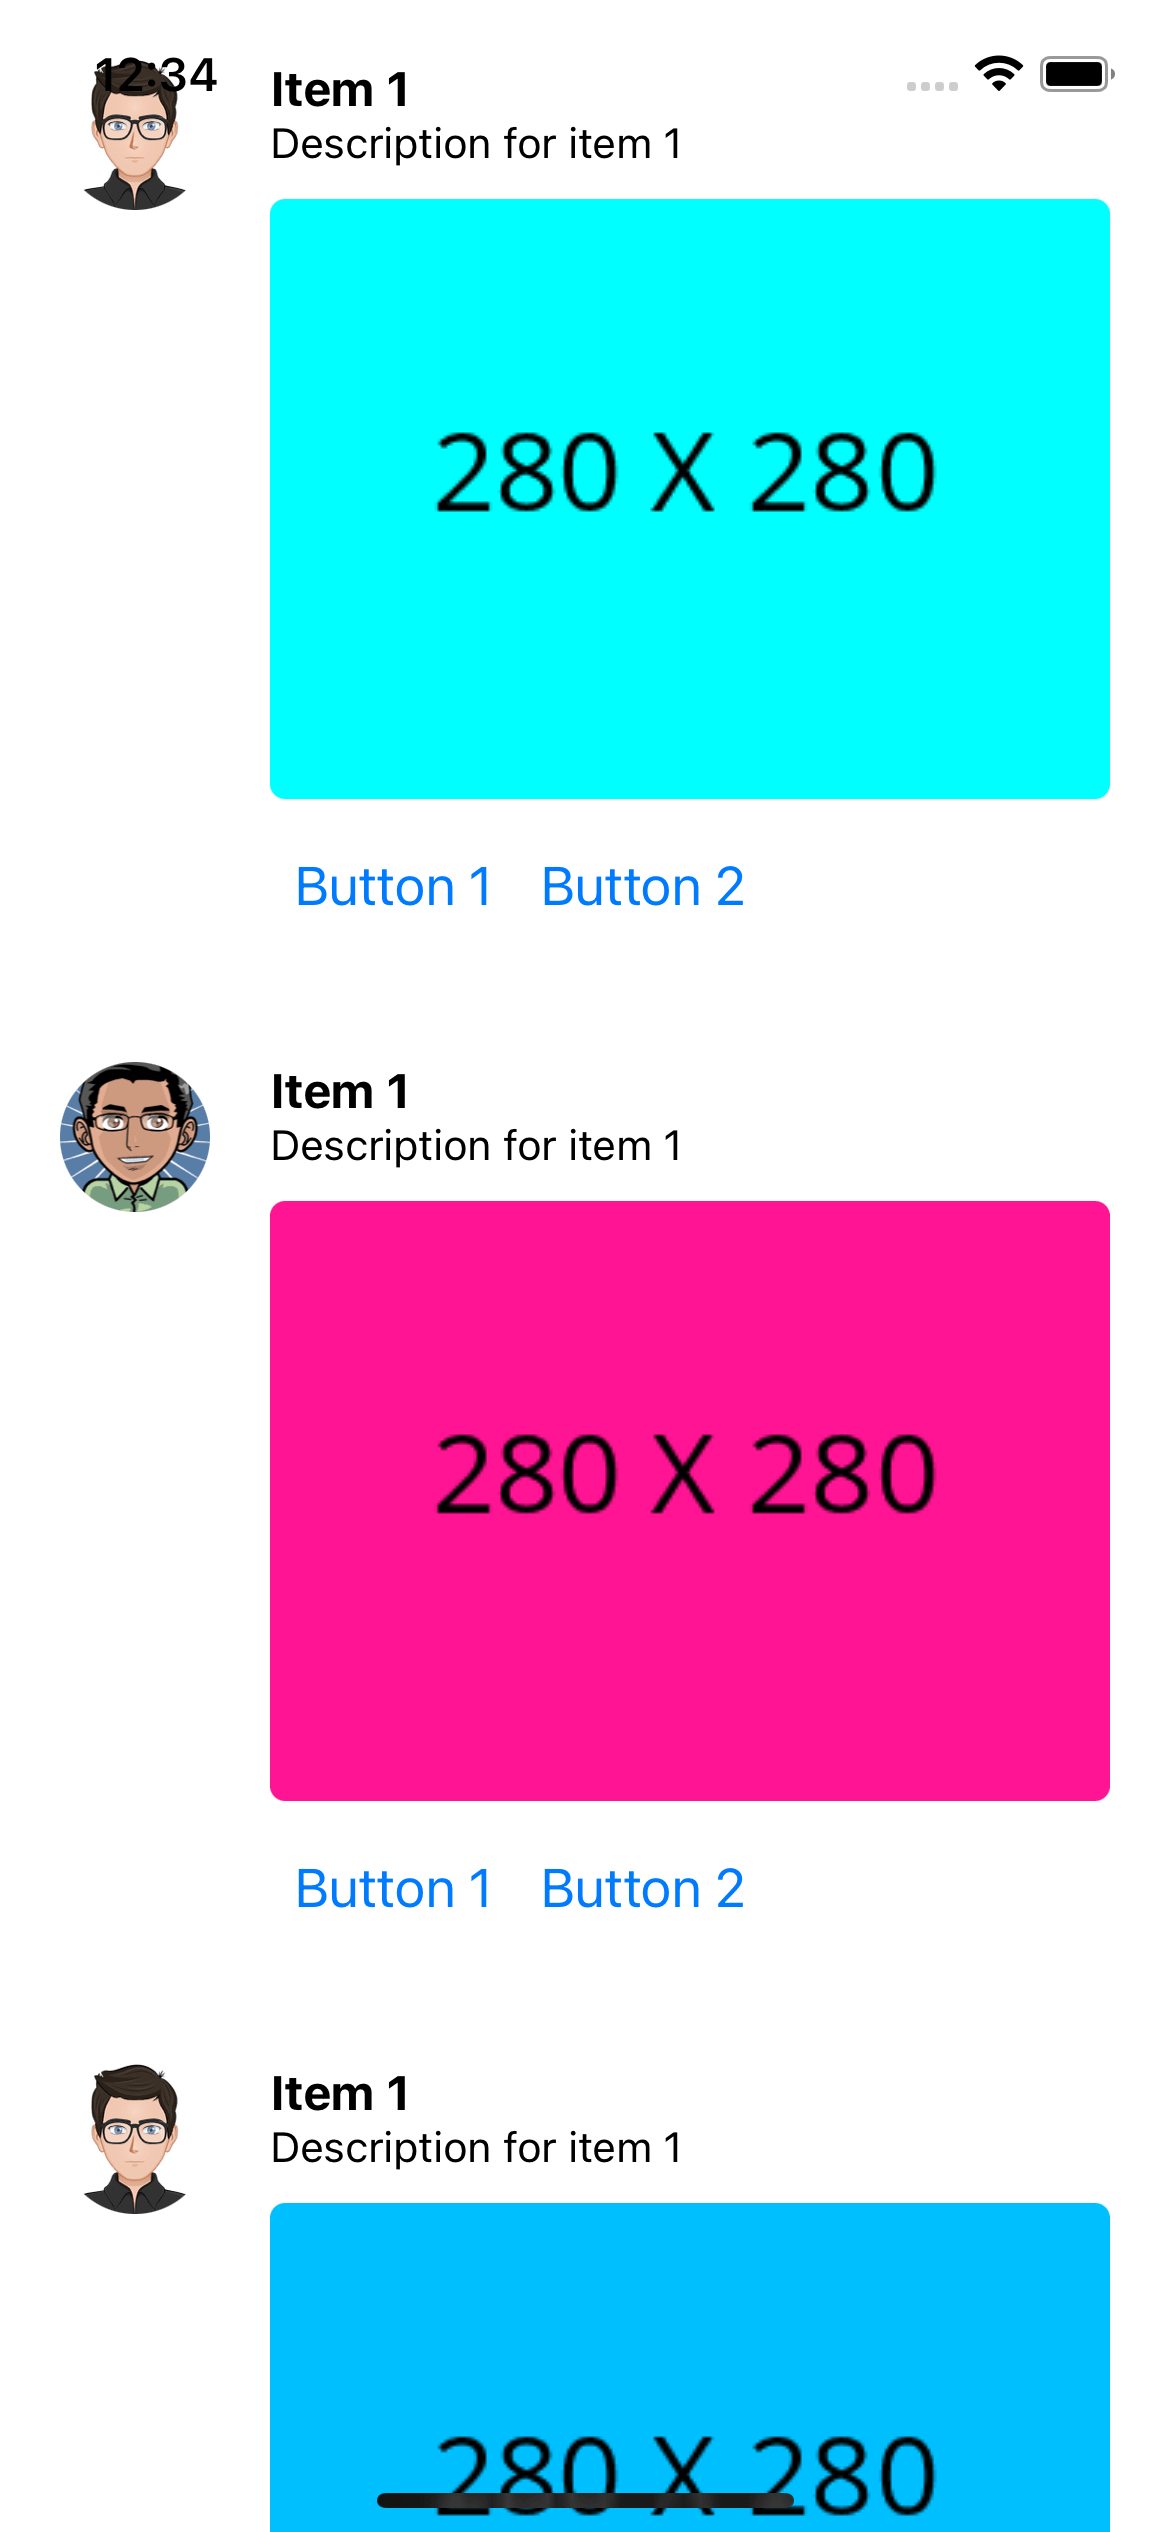 react native UI example. Timeline with tile description image and dynamic buttons